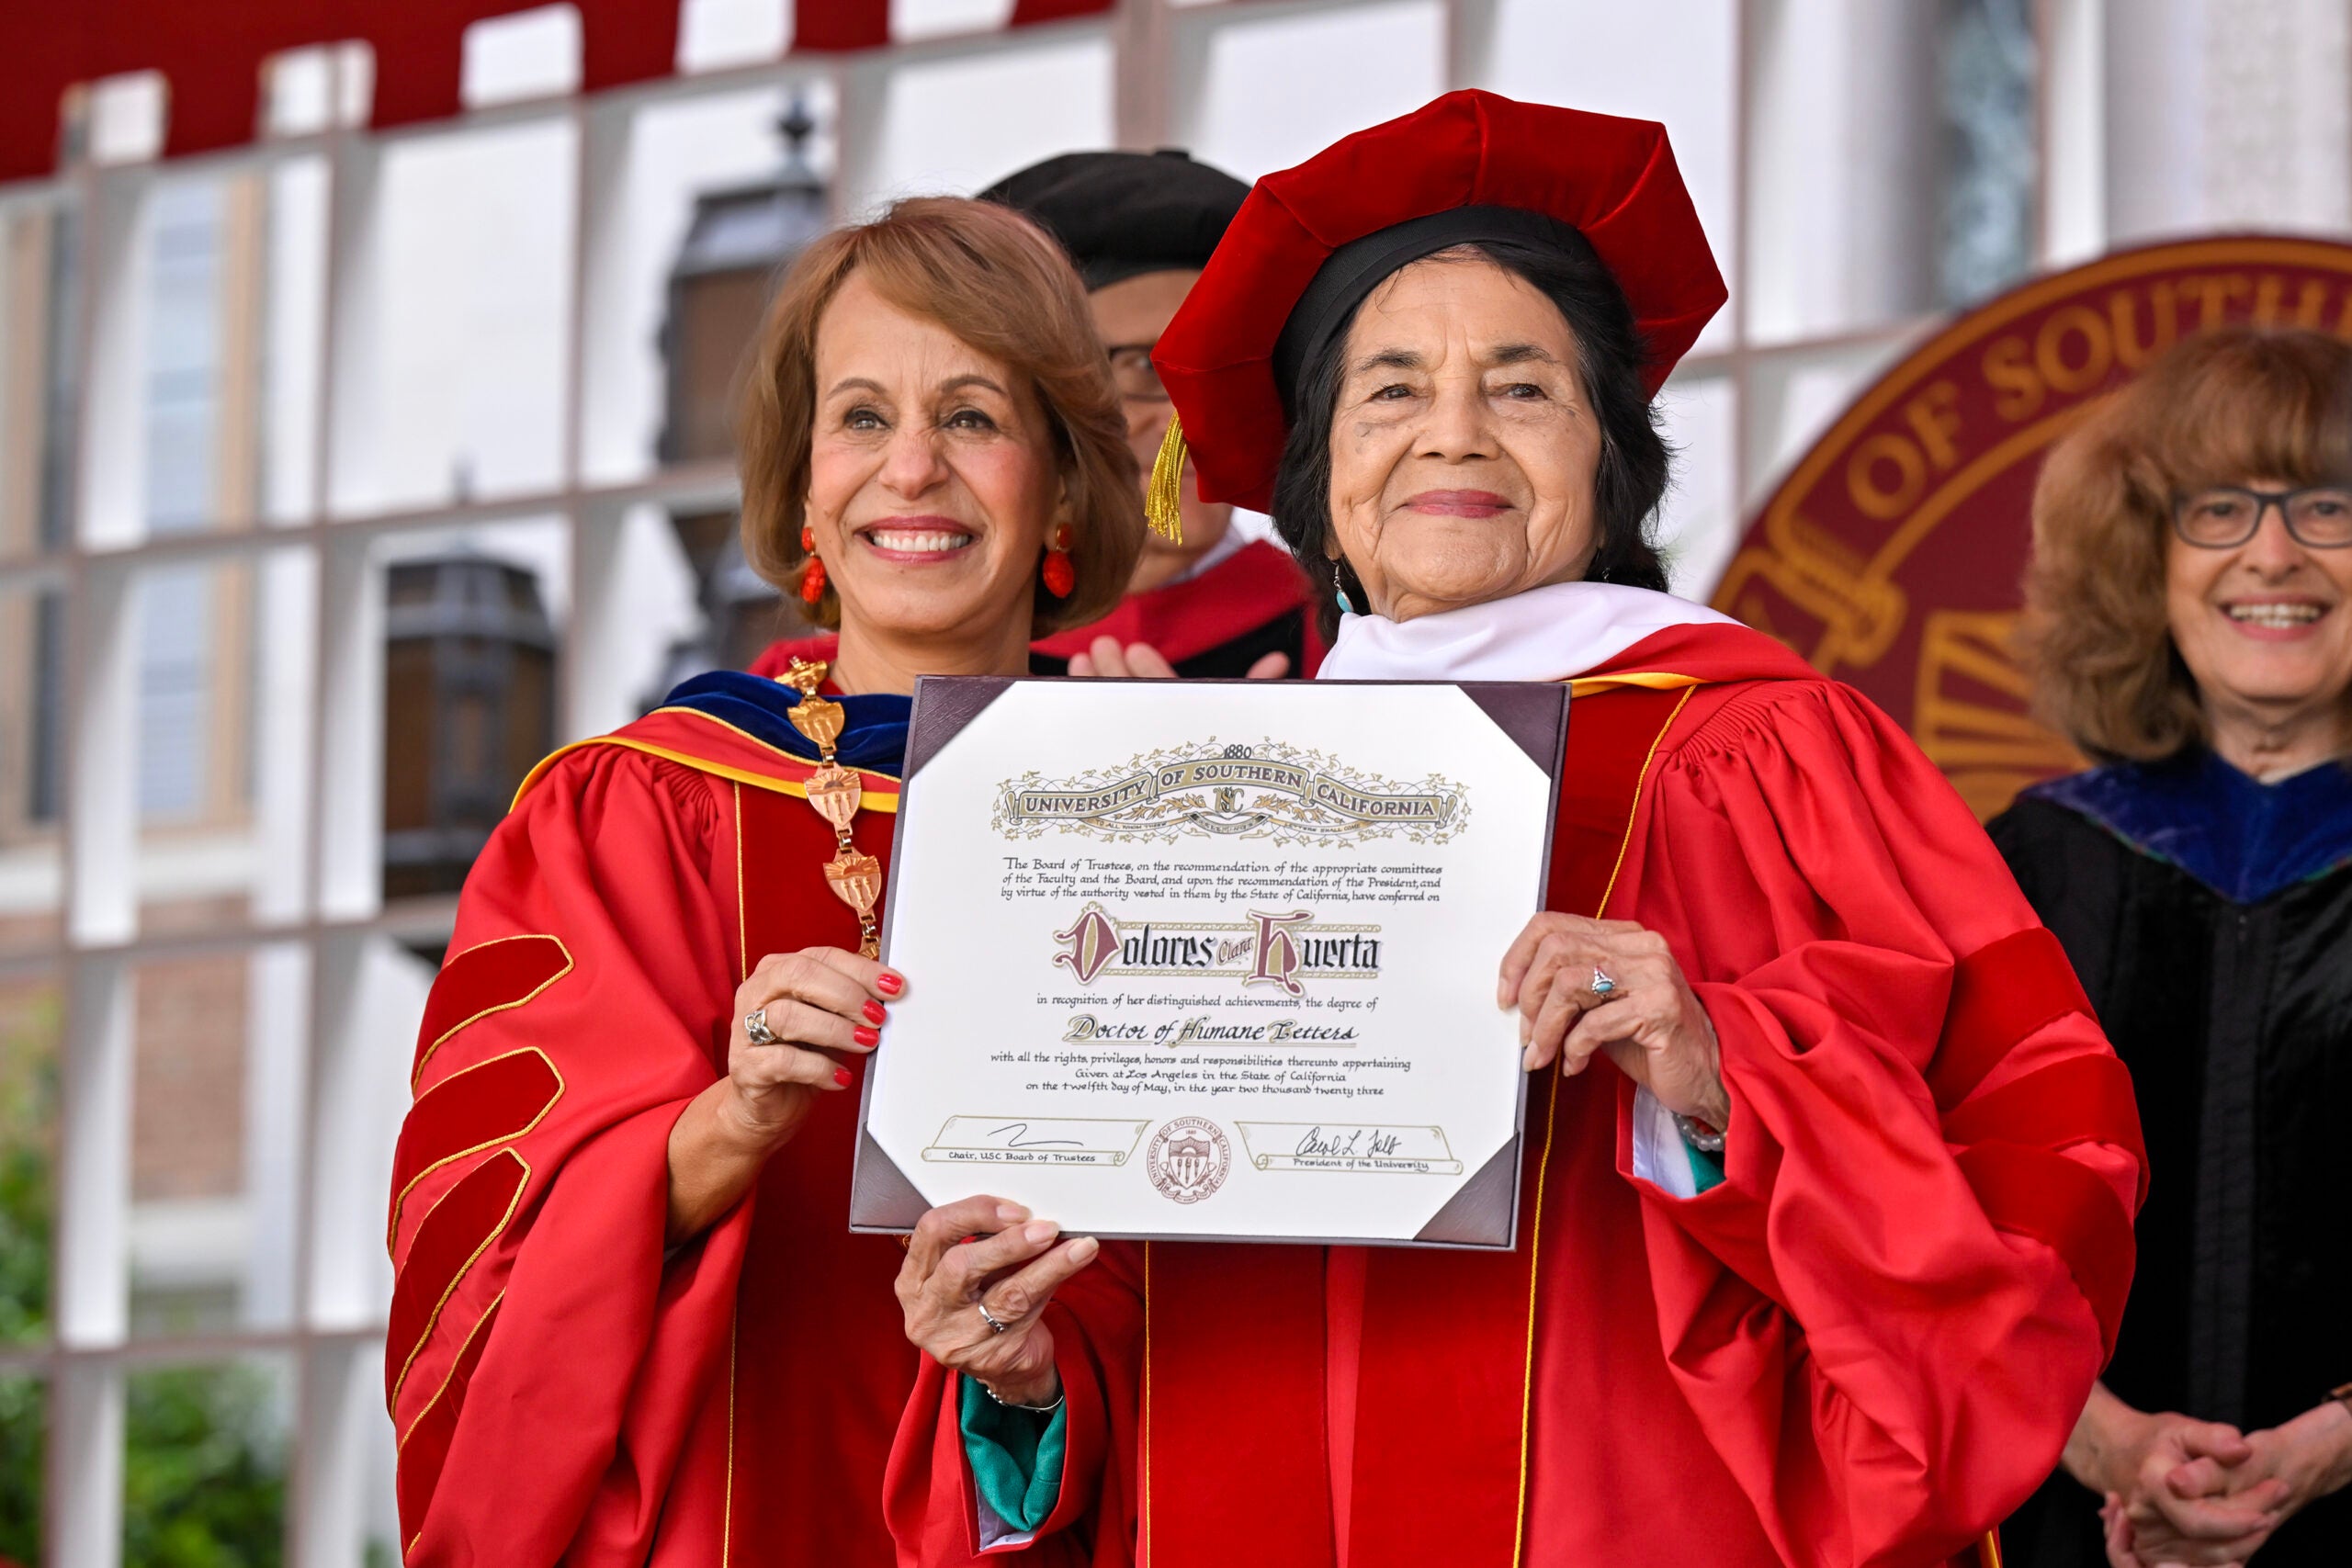 USC President Carol L. Folt presents Dolores Clara Huerta with a doctor of humane letters during the 140th commencement ceremony at the University of Southern California, May 12, 2023. (Photo/Gus Ruelas)